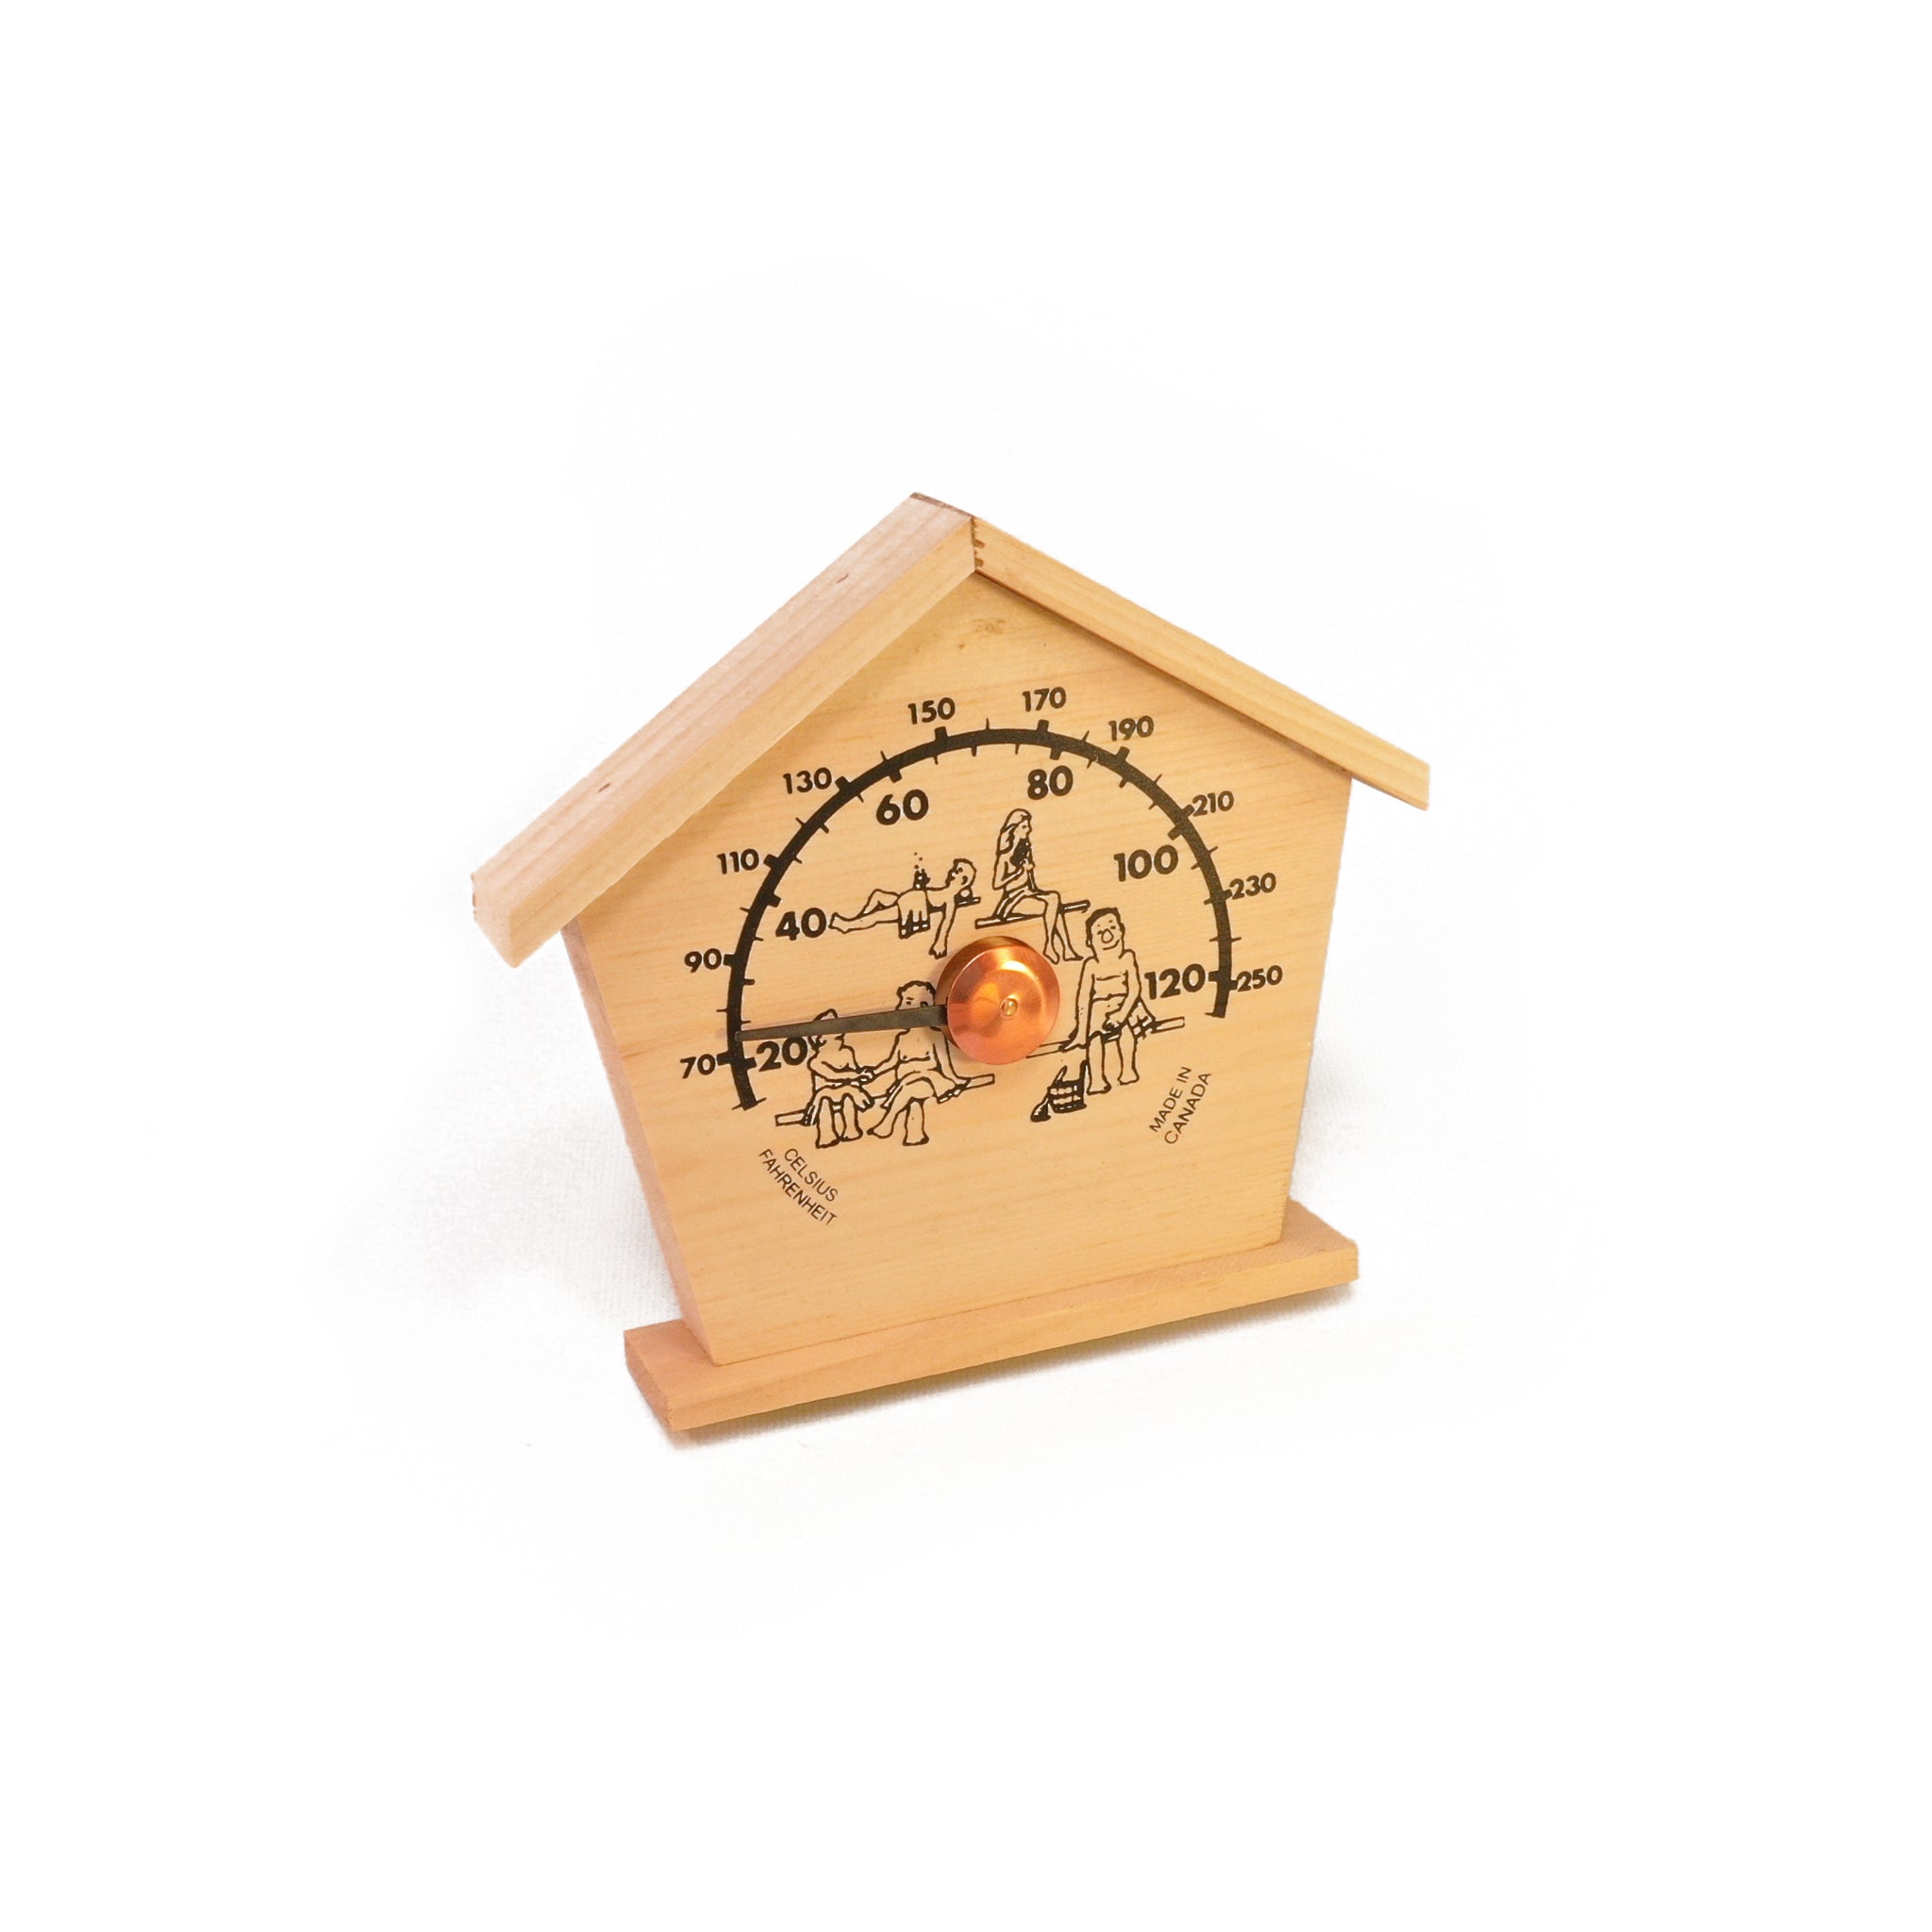 Cabin themed cedar sauna thermometer on white background.